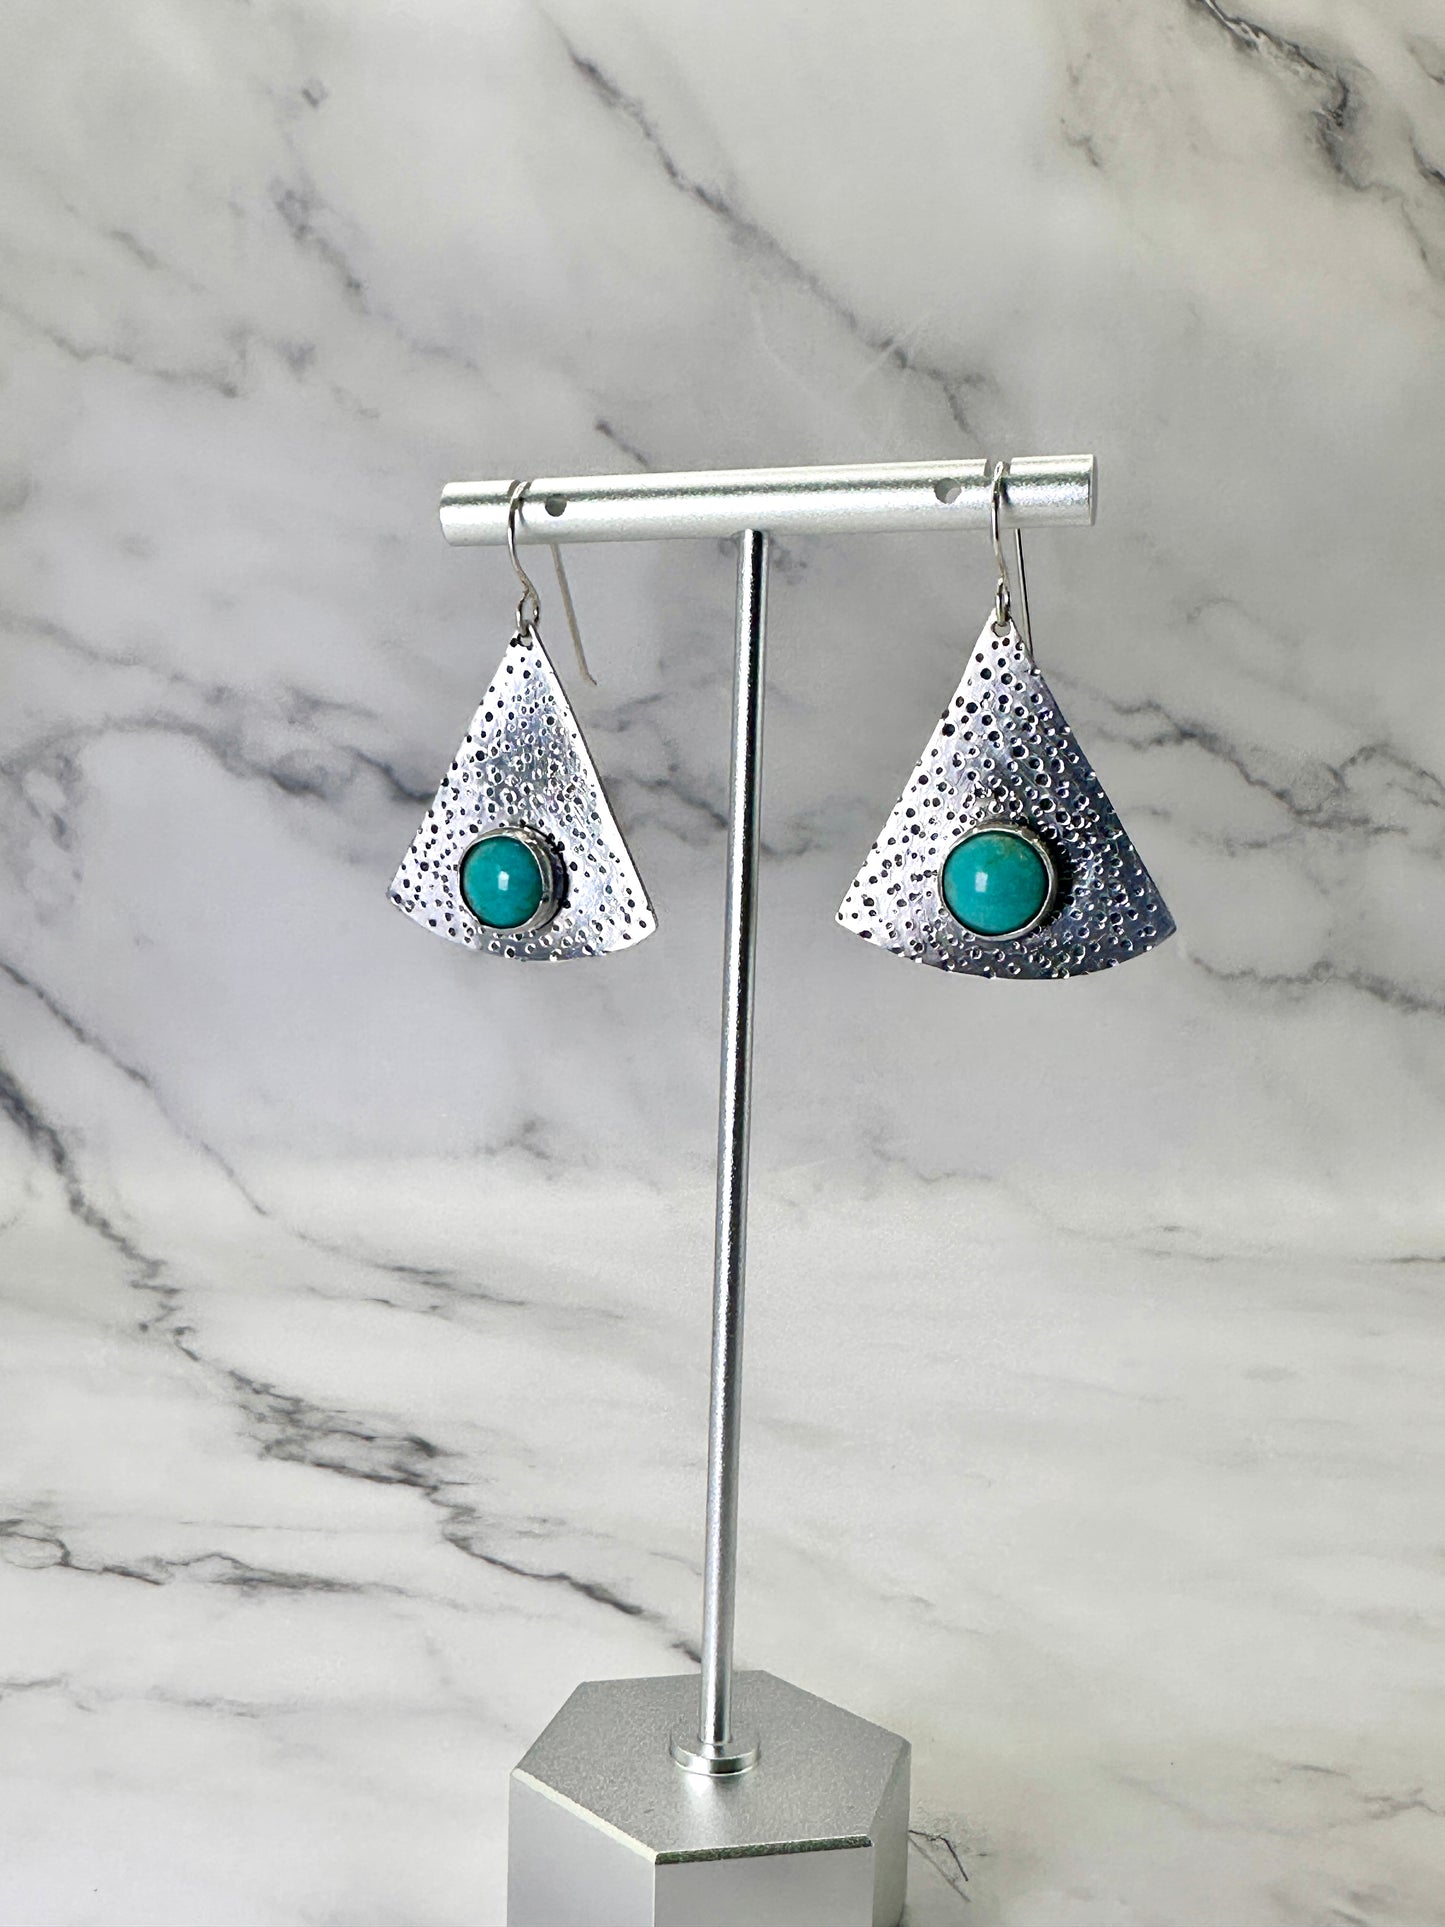 Silver Hanging Earrings with Gemstones in Shapes